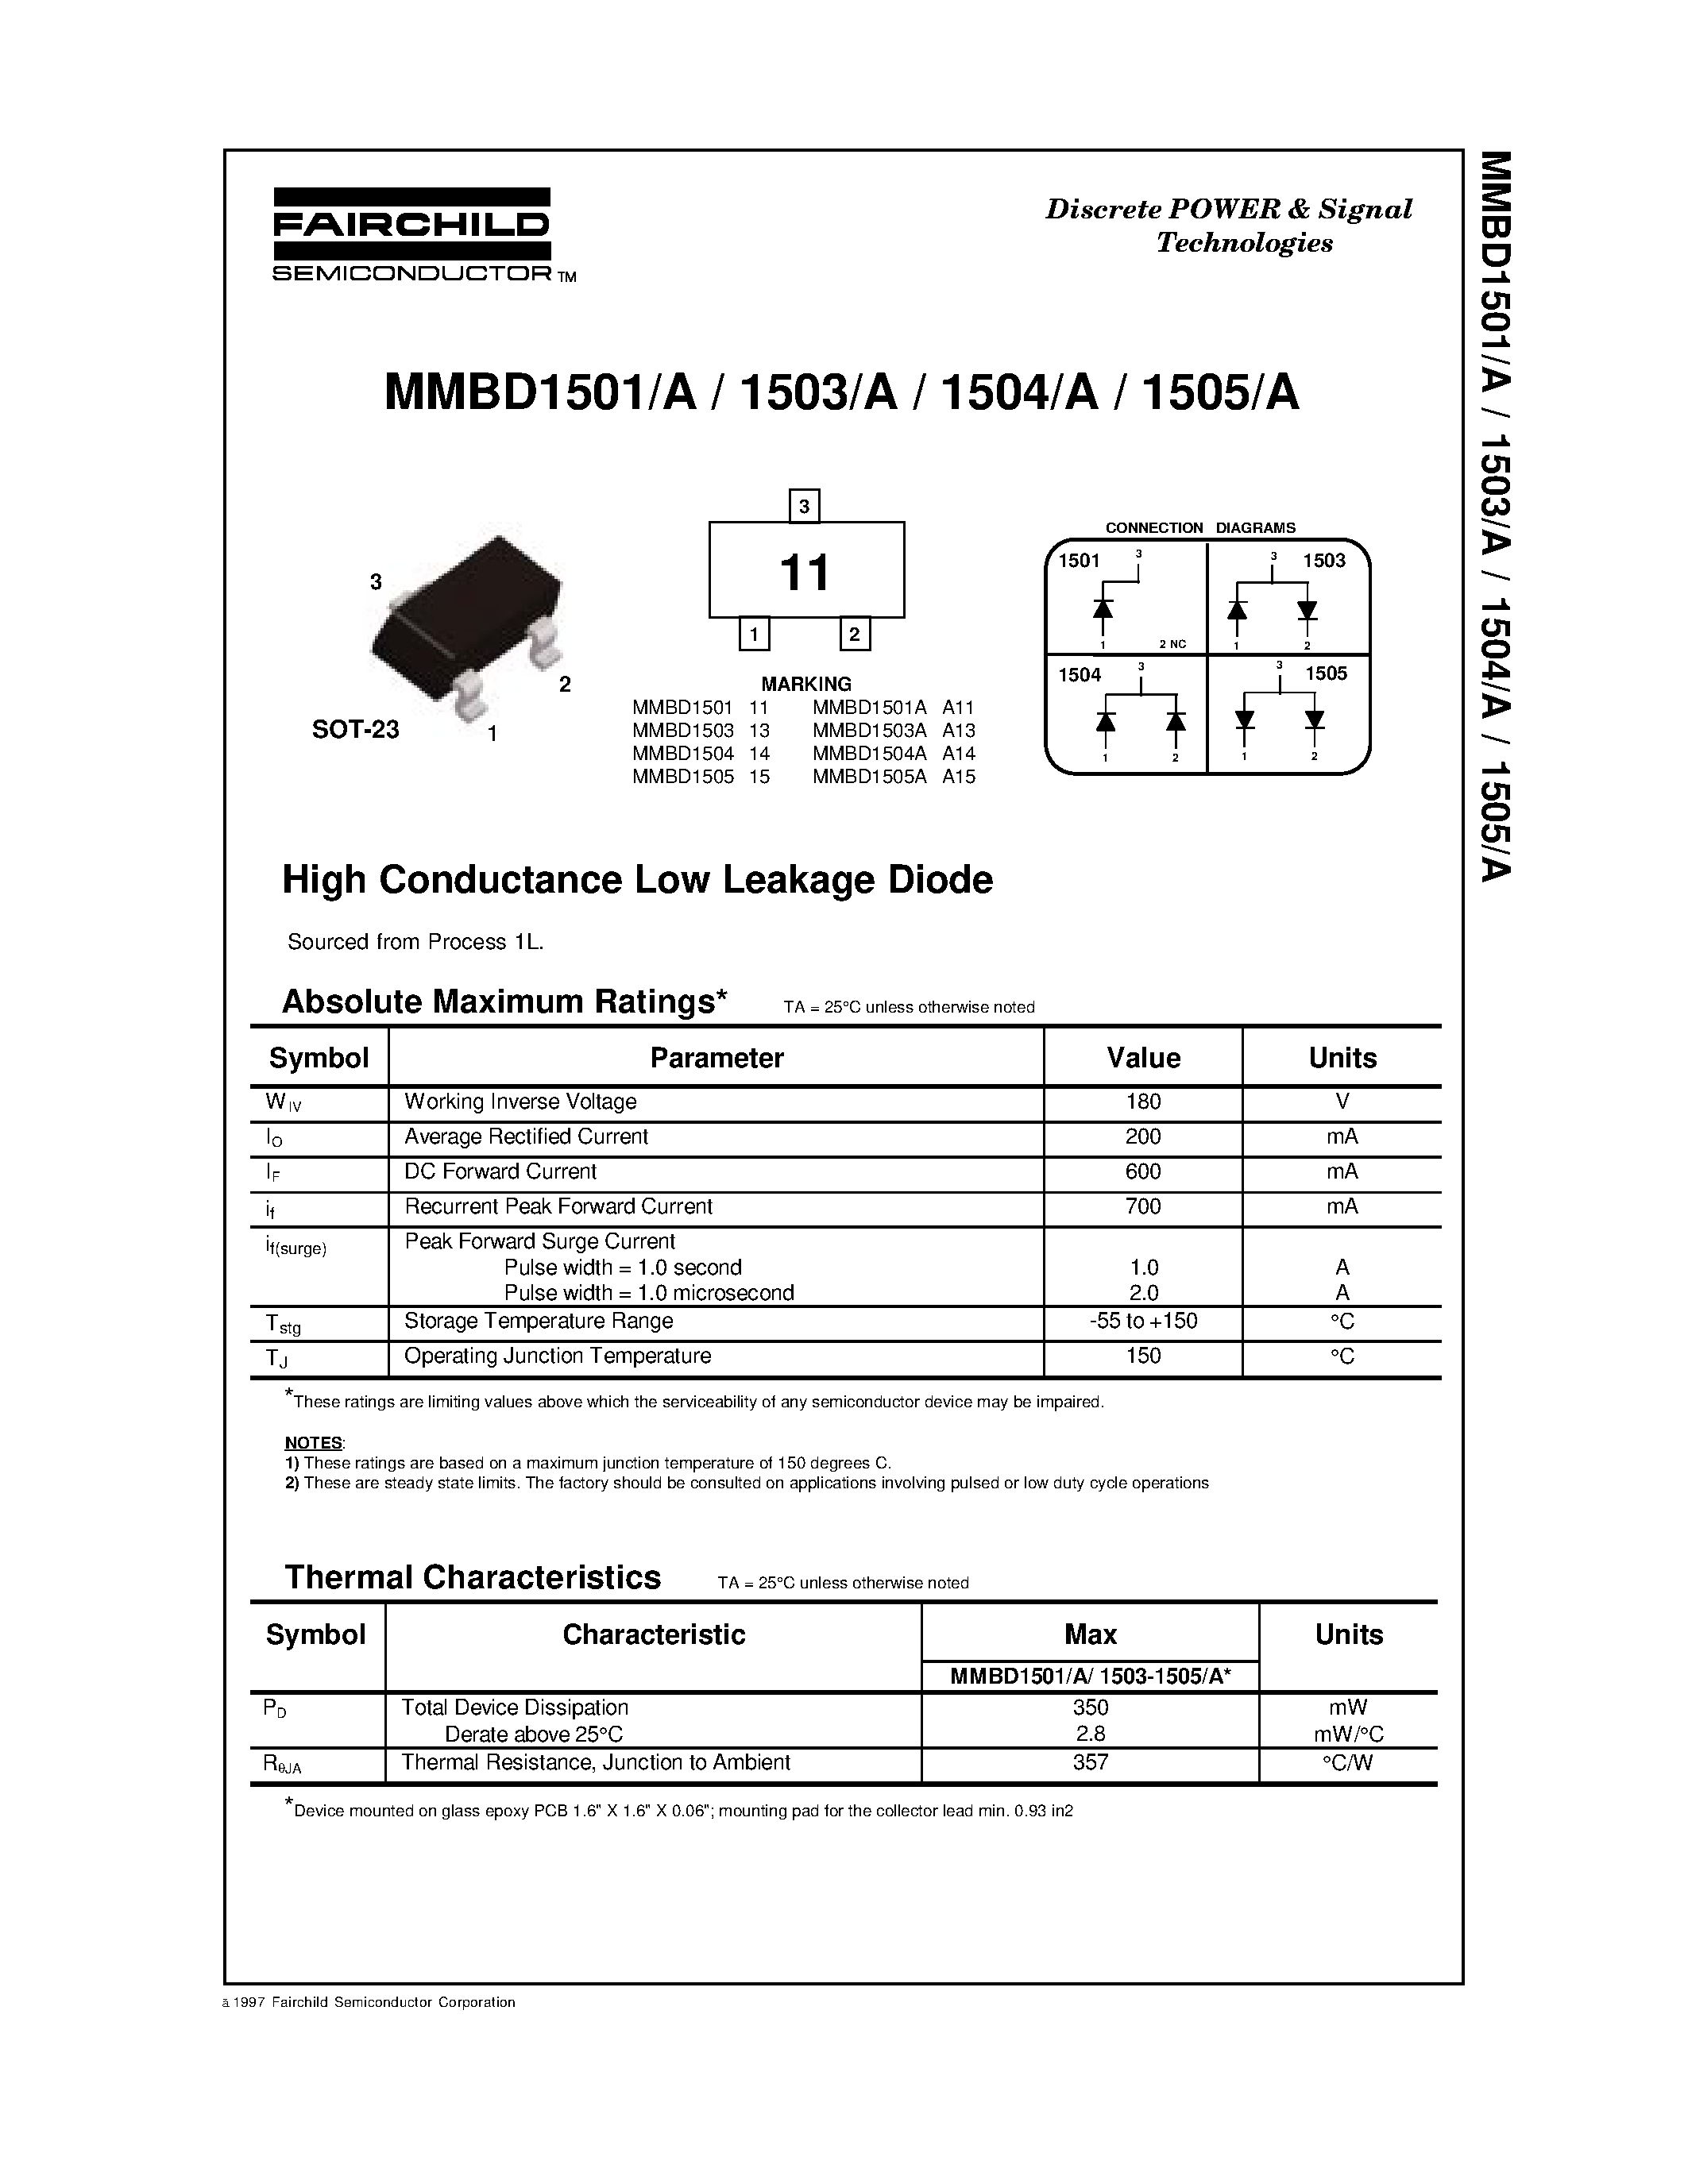 Datasheet MMBD1501 - High Conductance Low Leakage Diode page 1